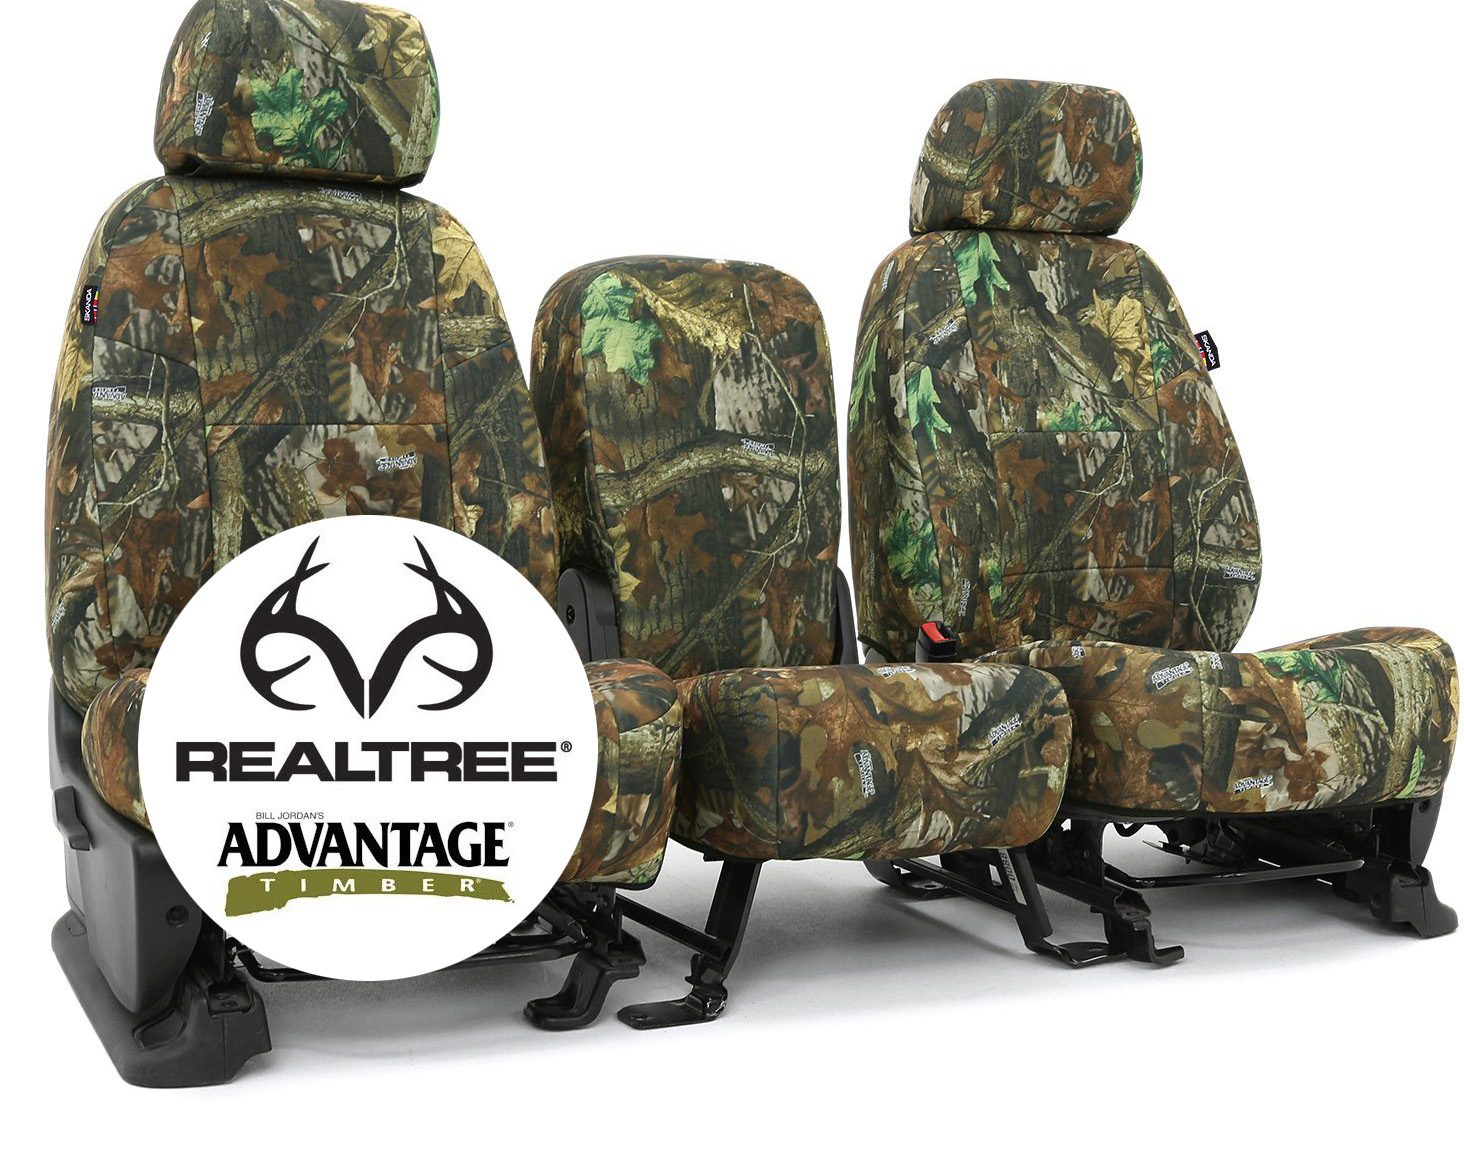 Realtree Advantage Timber seat covers